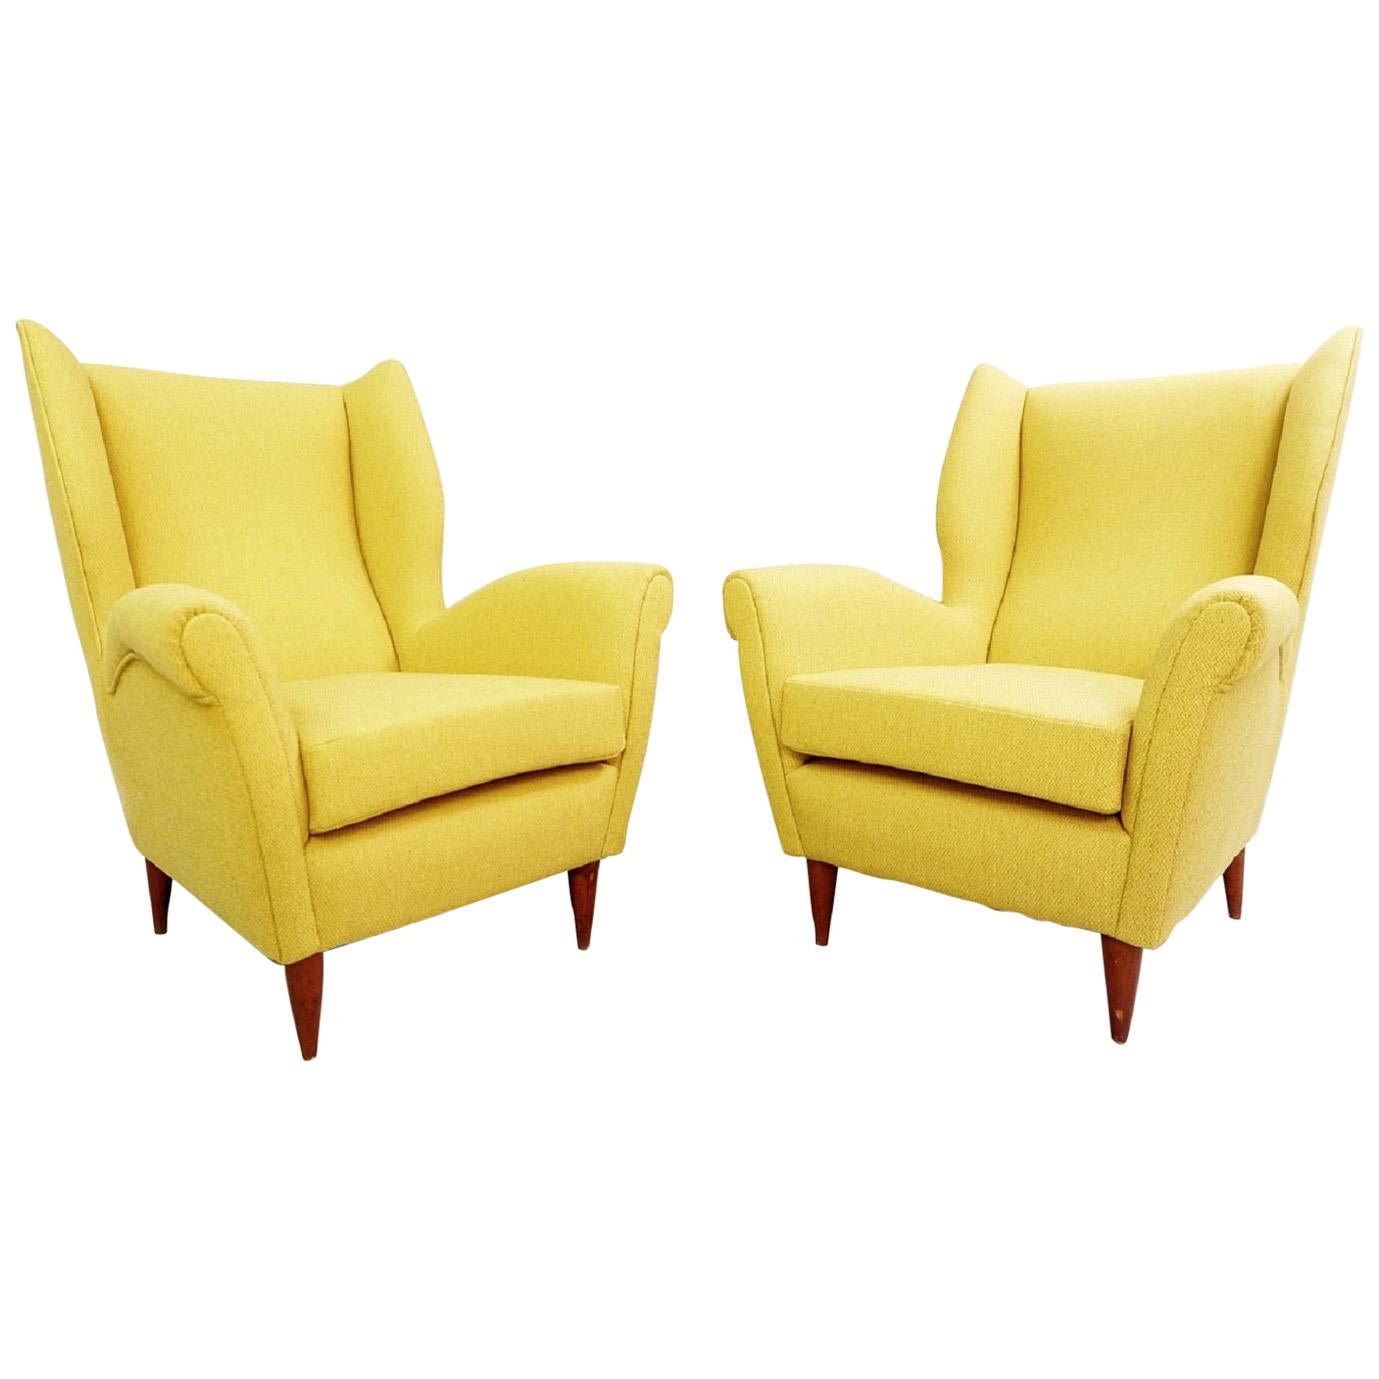 Pair of High Back Armchairs by Gio Ponti, 1950s, New Curry Yellow Upholstery